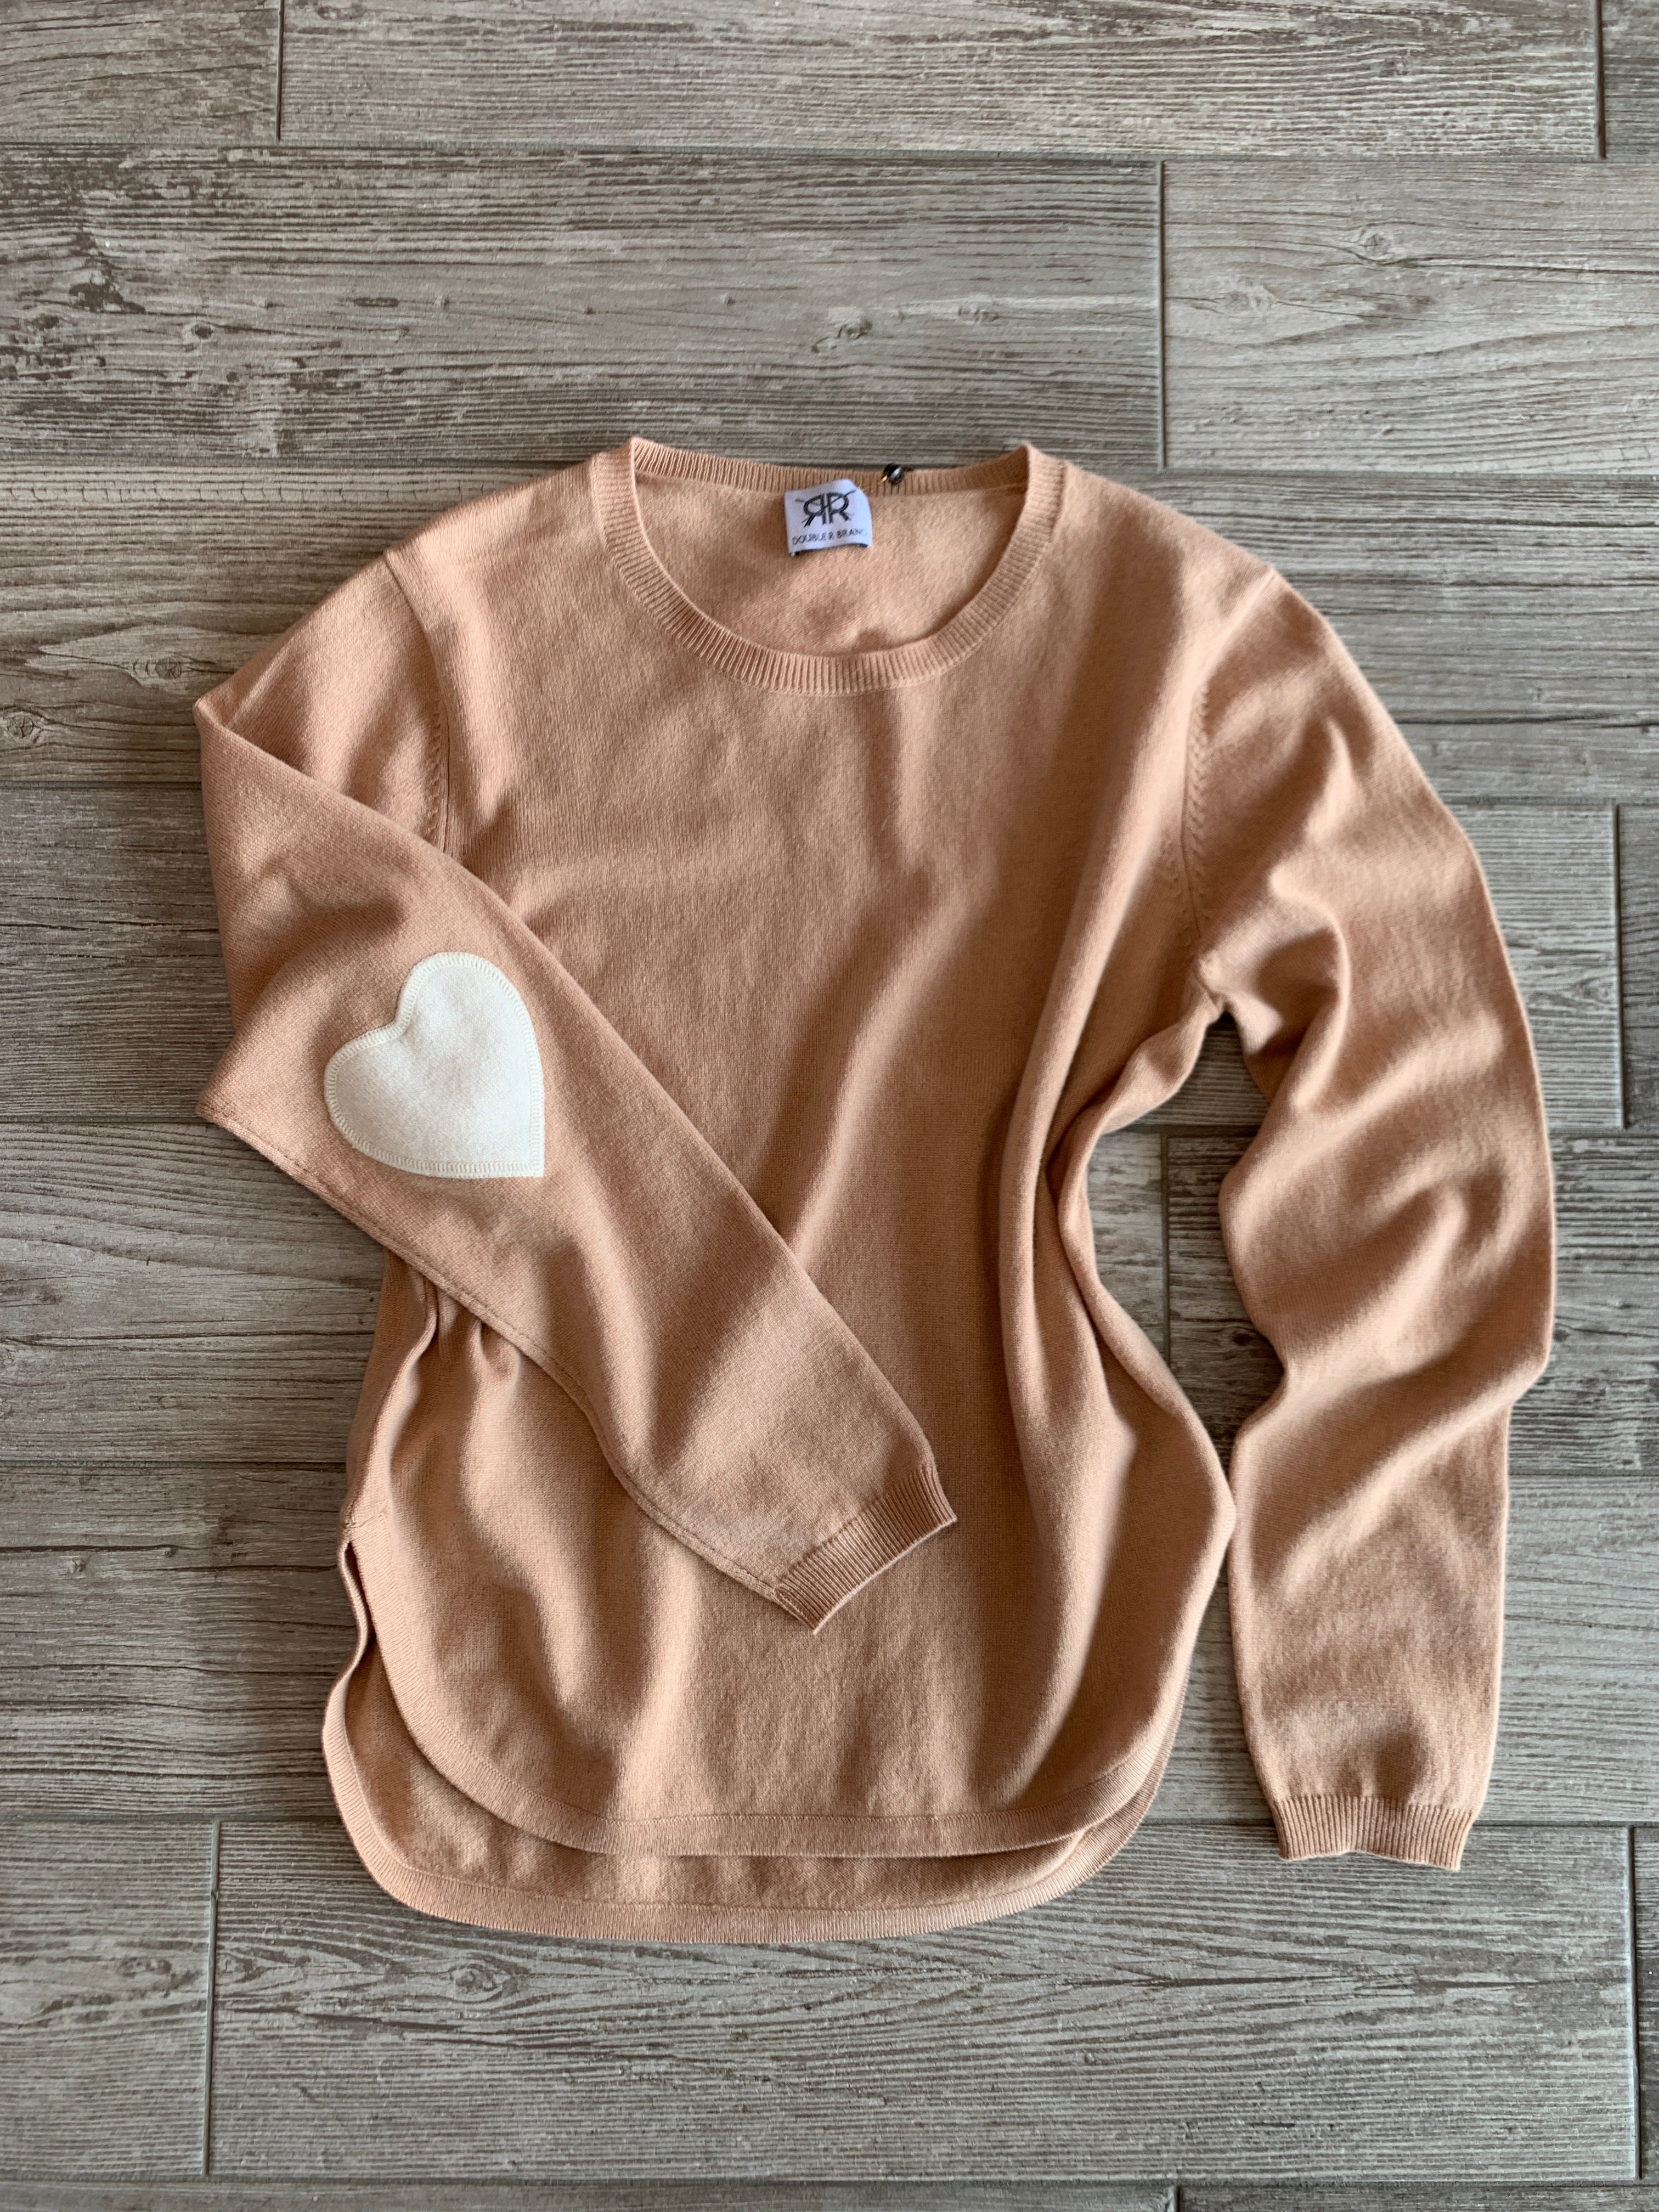 Scoop Hem Cashmere Sweater with Heart Elbow Patches - Camel/Ivory – Double  R Brand - Dallas